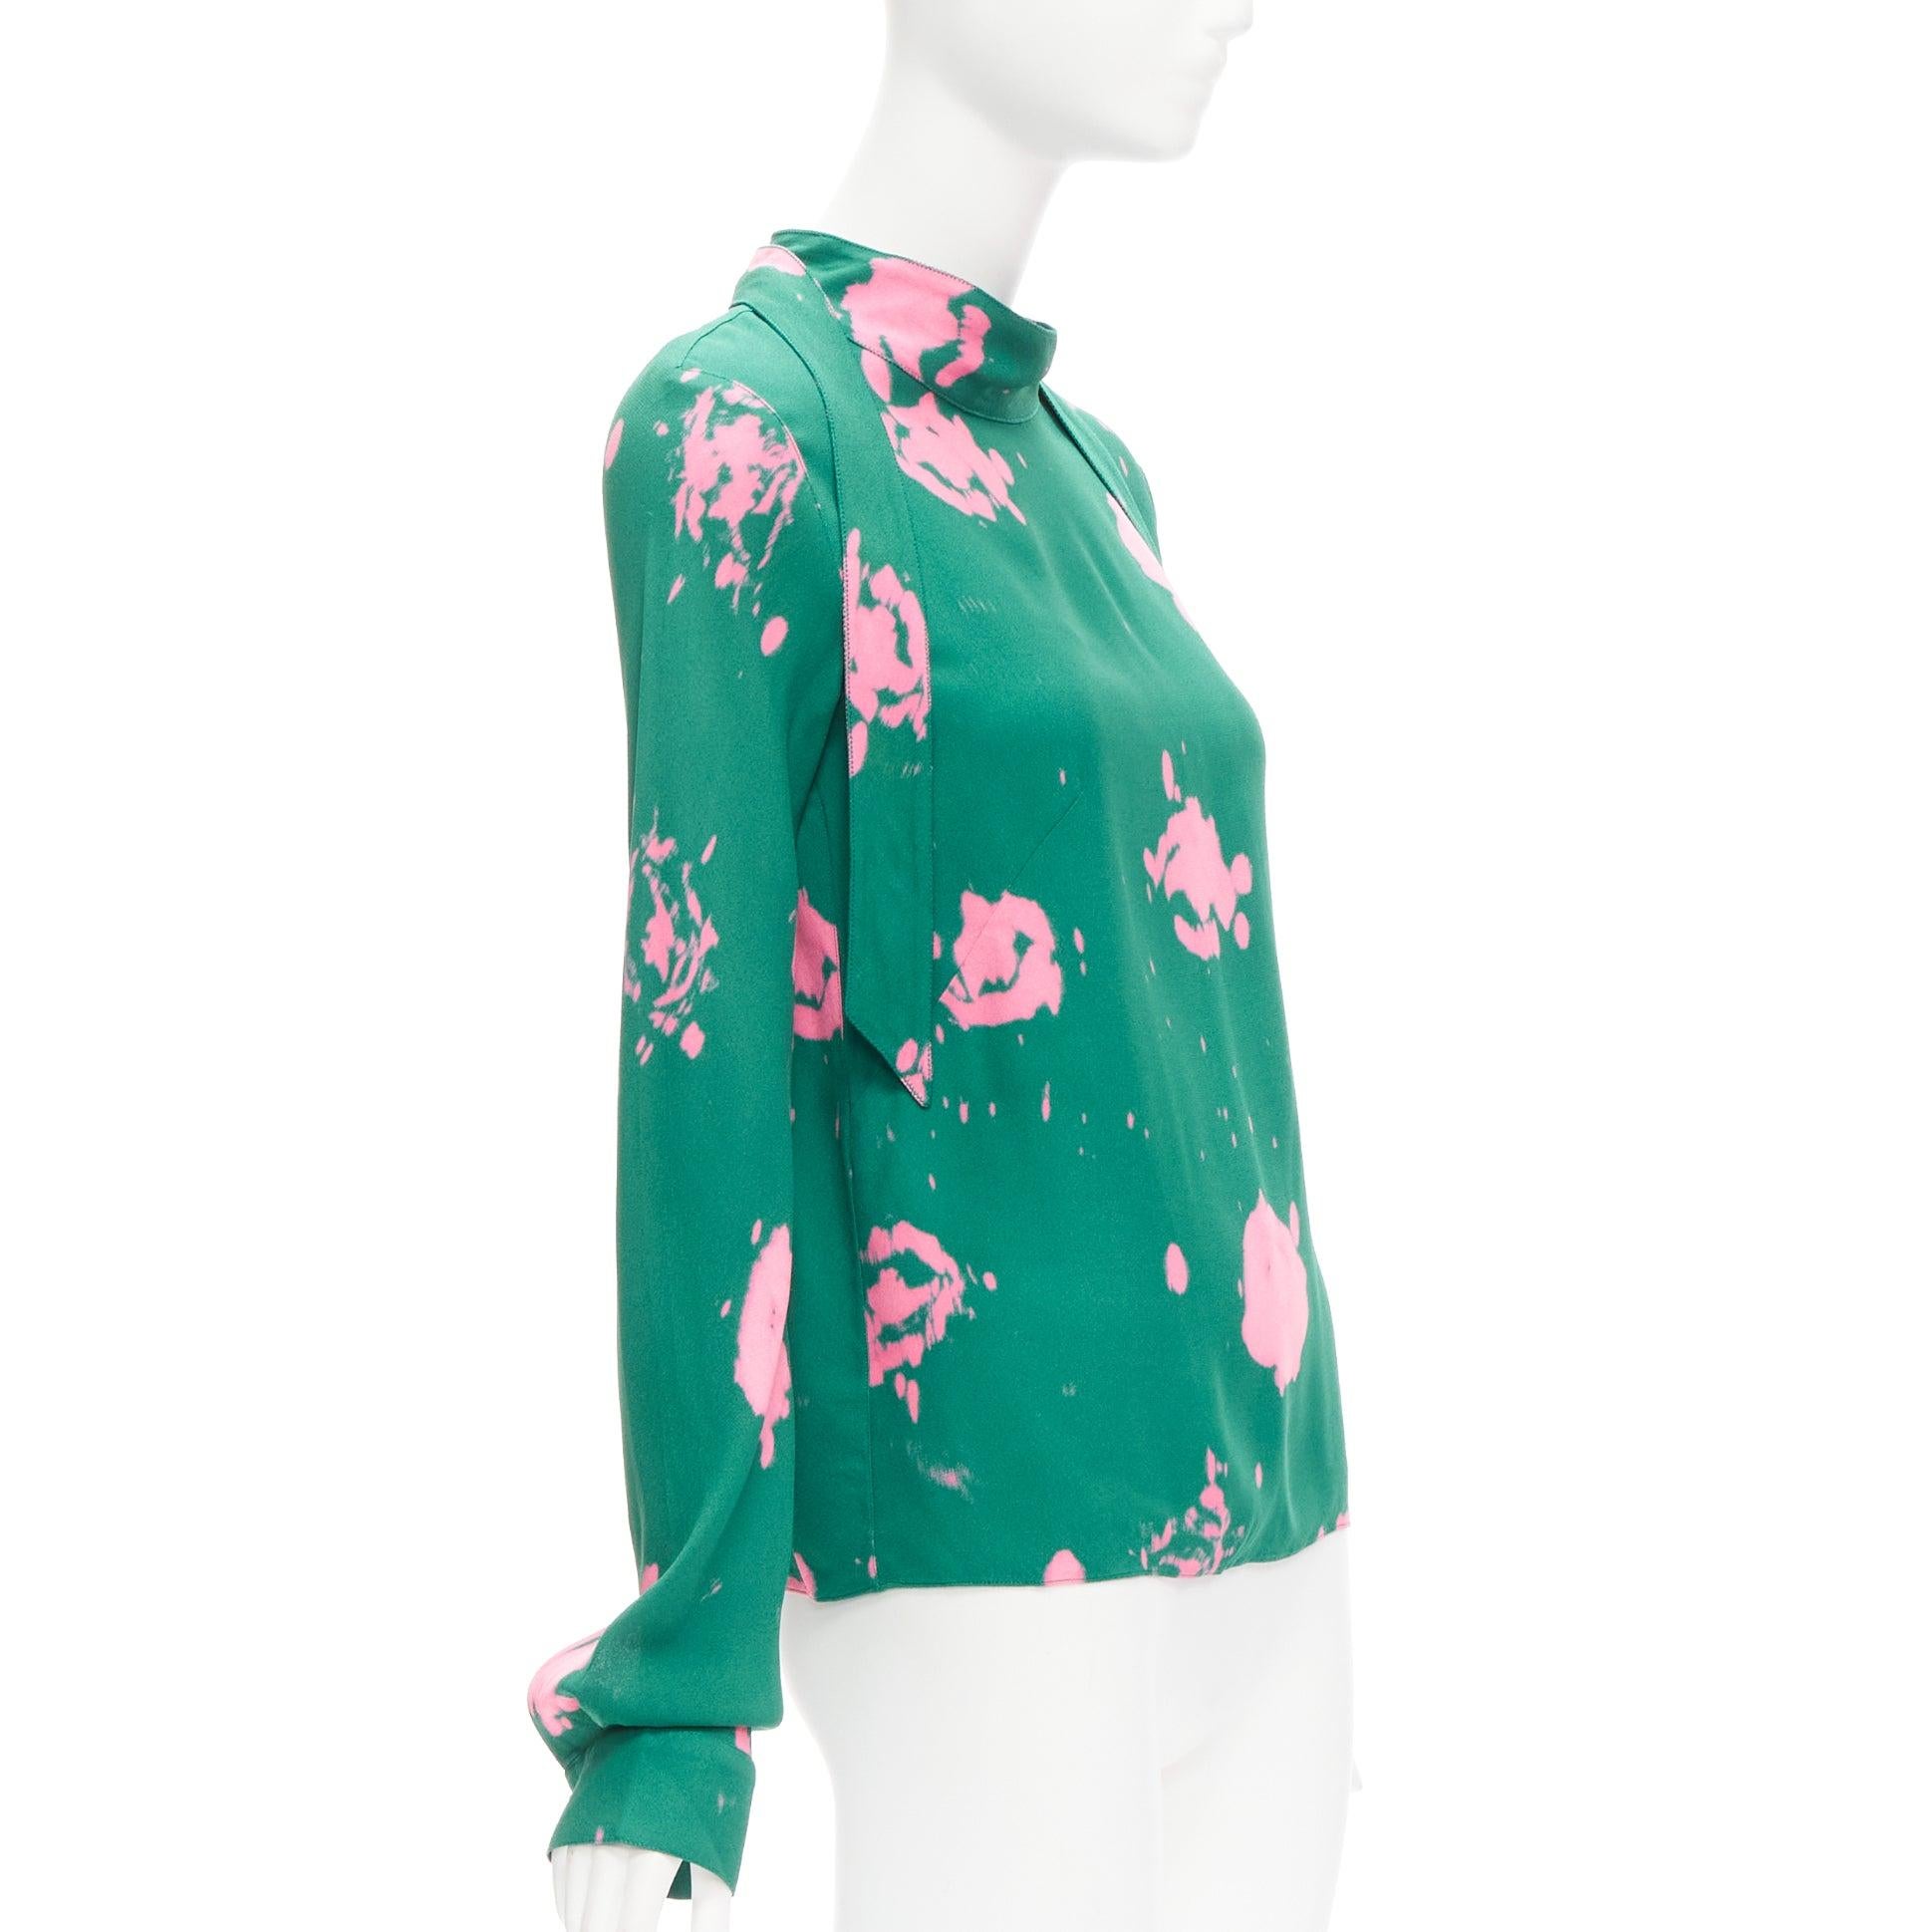 MARNI green pink splatter tie dye print tie neck long sleeve blouse IT38 XS
Reference: CELG/A00351
Brand: Marni
Material: Fabric
Color: Green, Pink
Pattern: Abstract
Closure: Tie Neck
Extra Details: Tie neck.
Made in: Italy

CONDITION:
Condition: